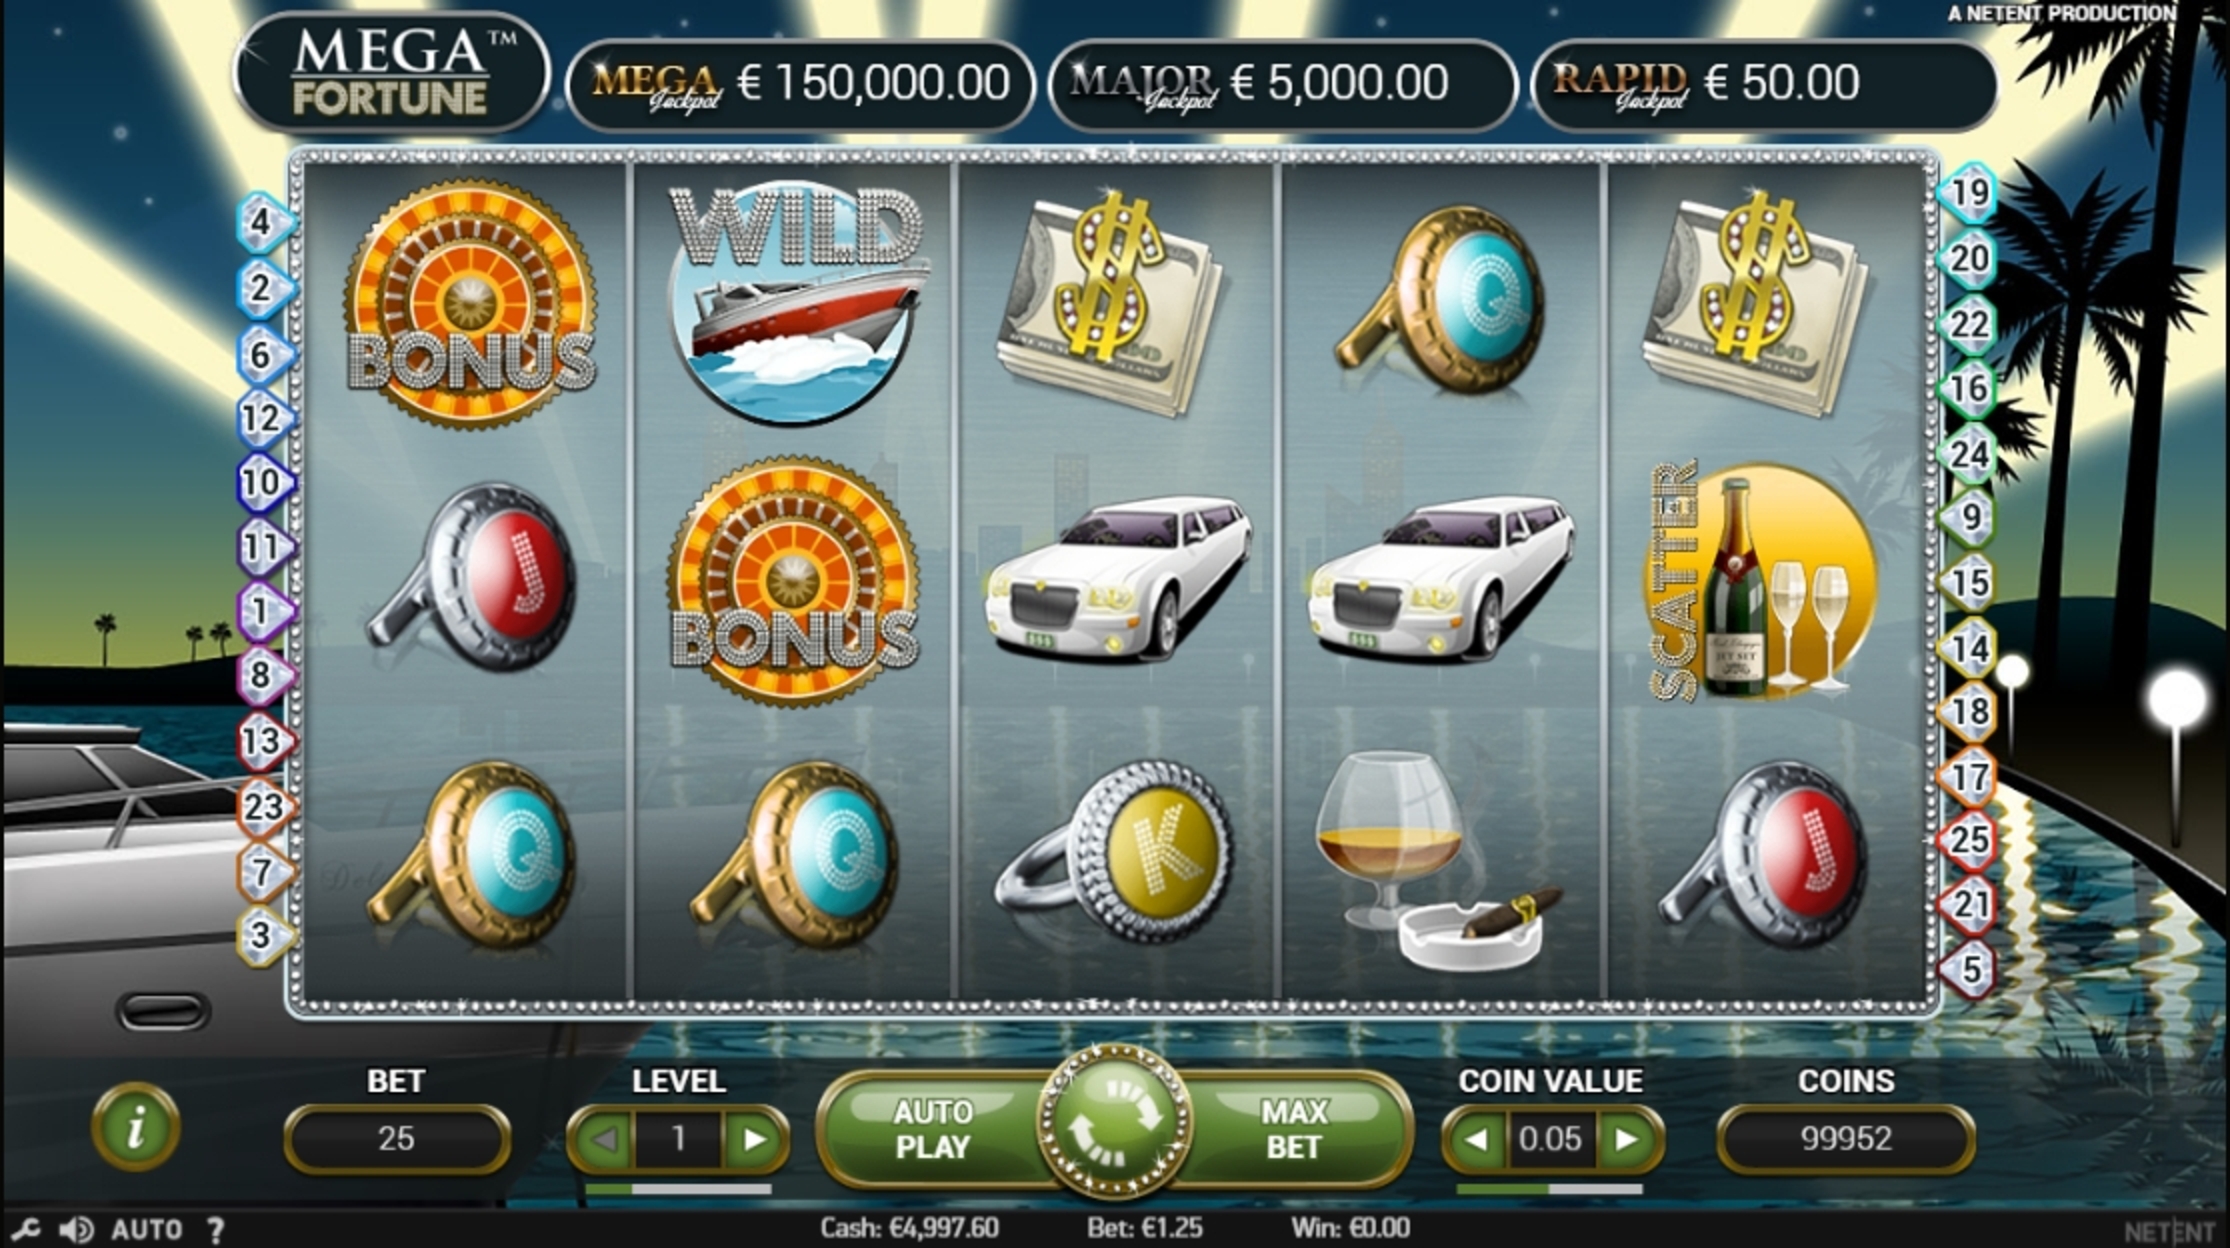 Reels in Mega Fortune Slot Game by NetEnt